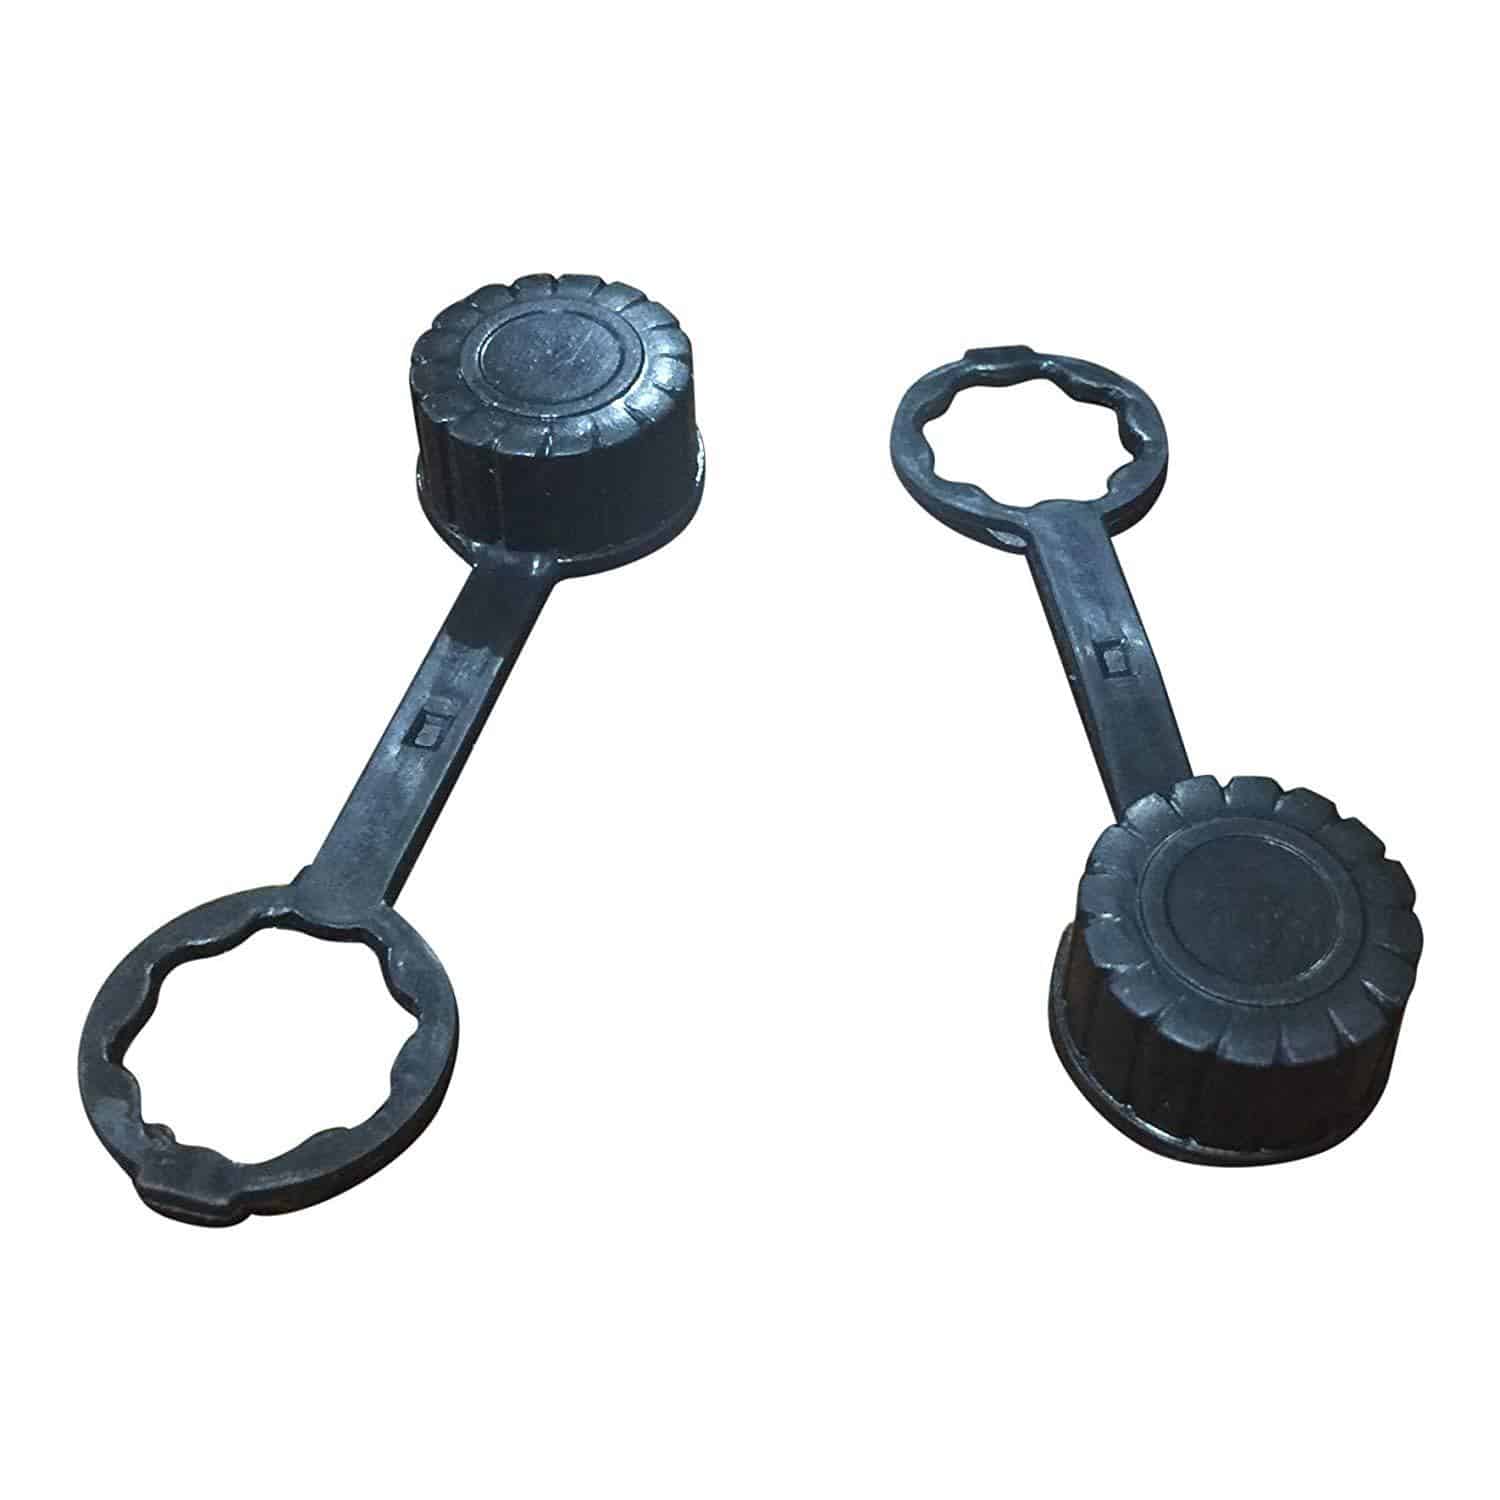 2 Rear Vent Screw Caps for Replacement Gas Can - Includes Rubber Gasket 8.49 freeshipping - Kool Products